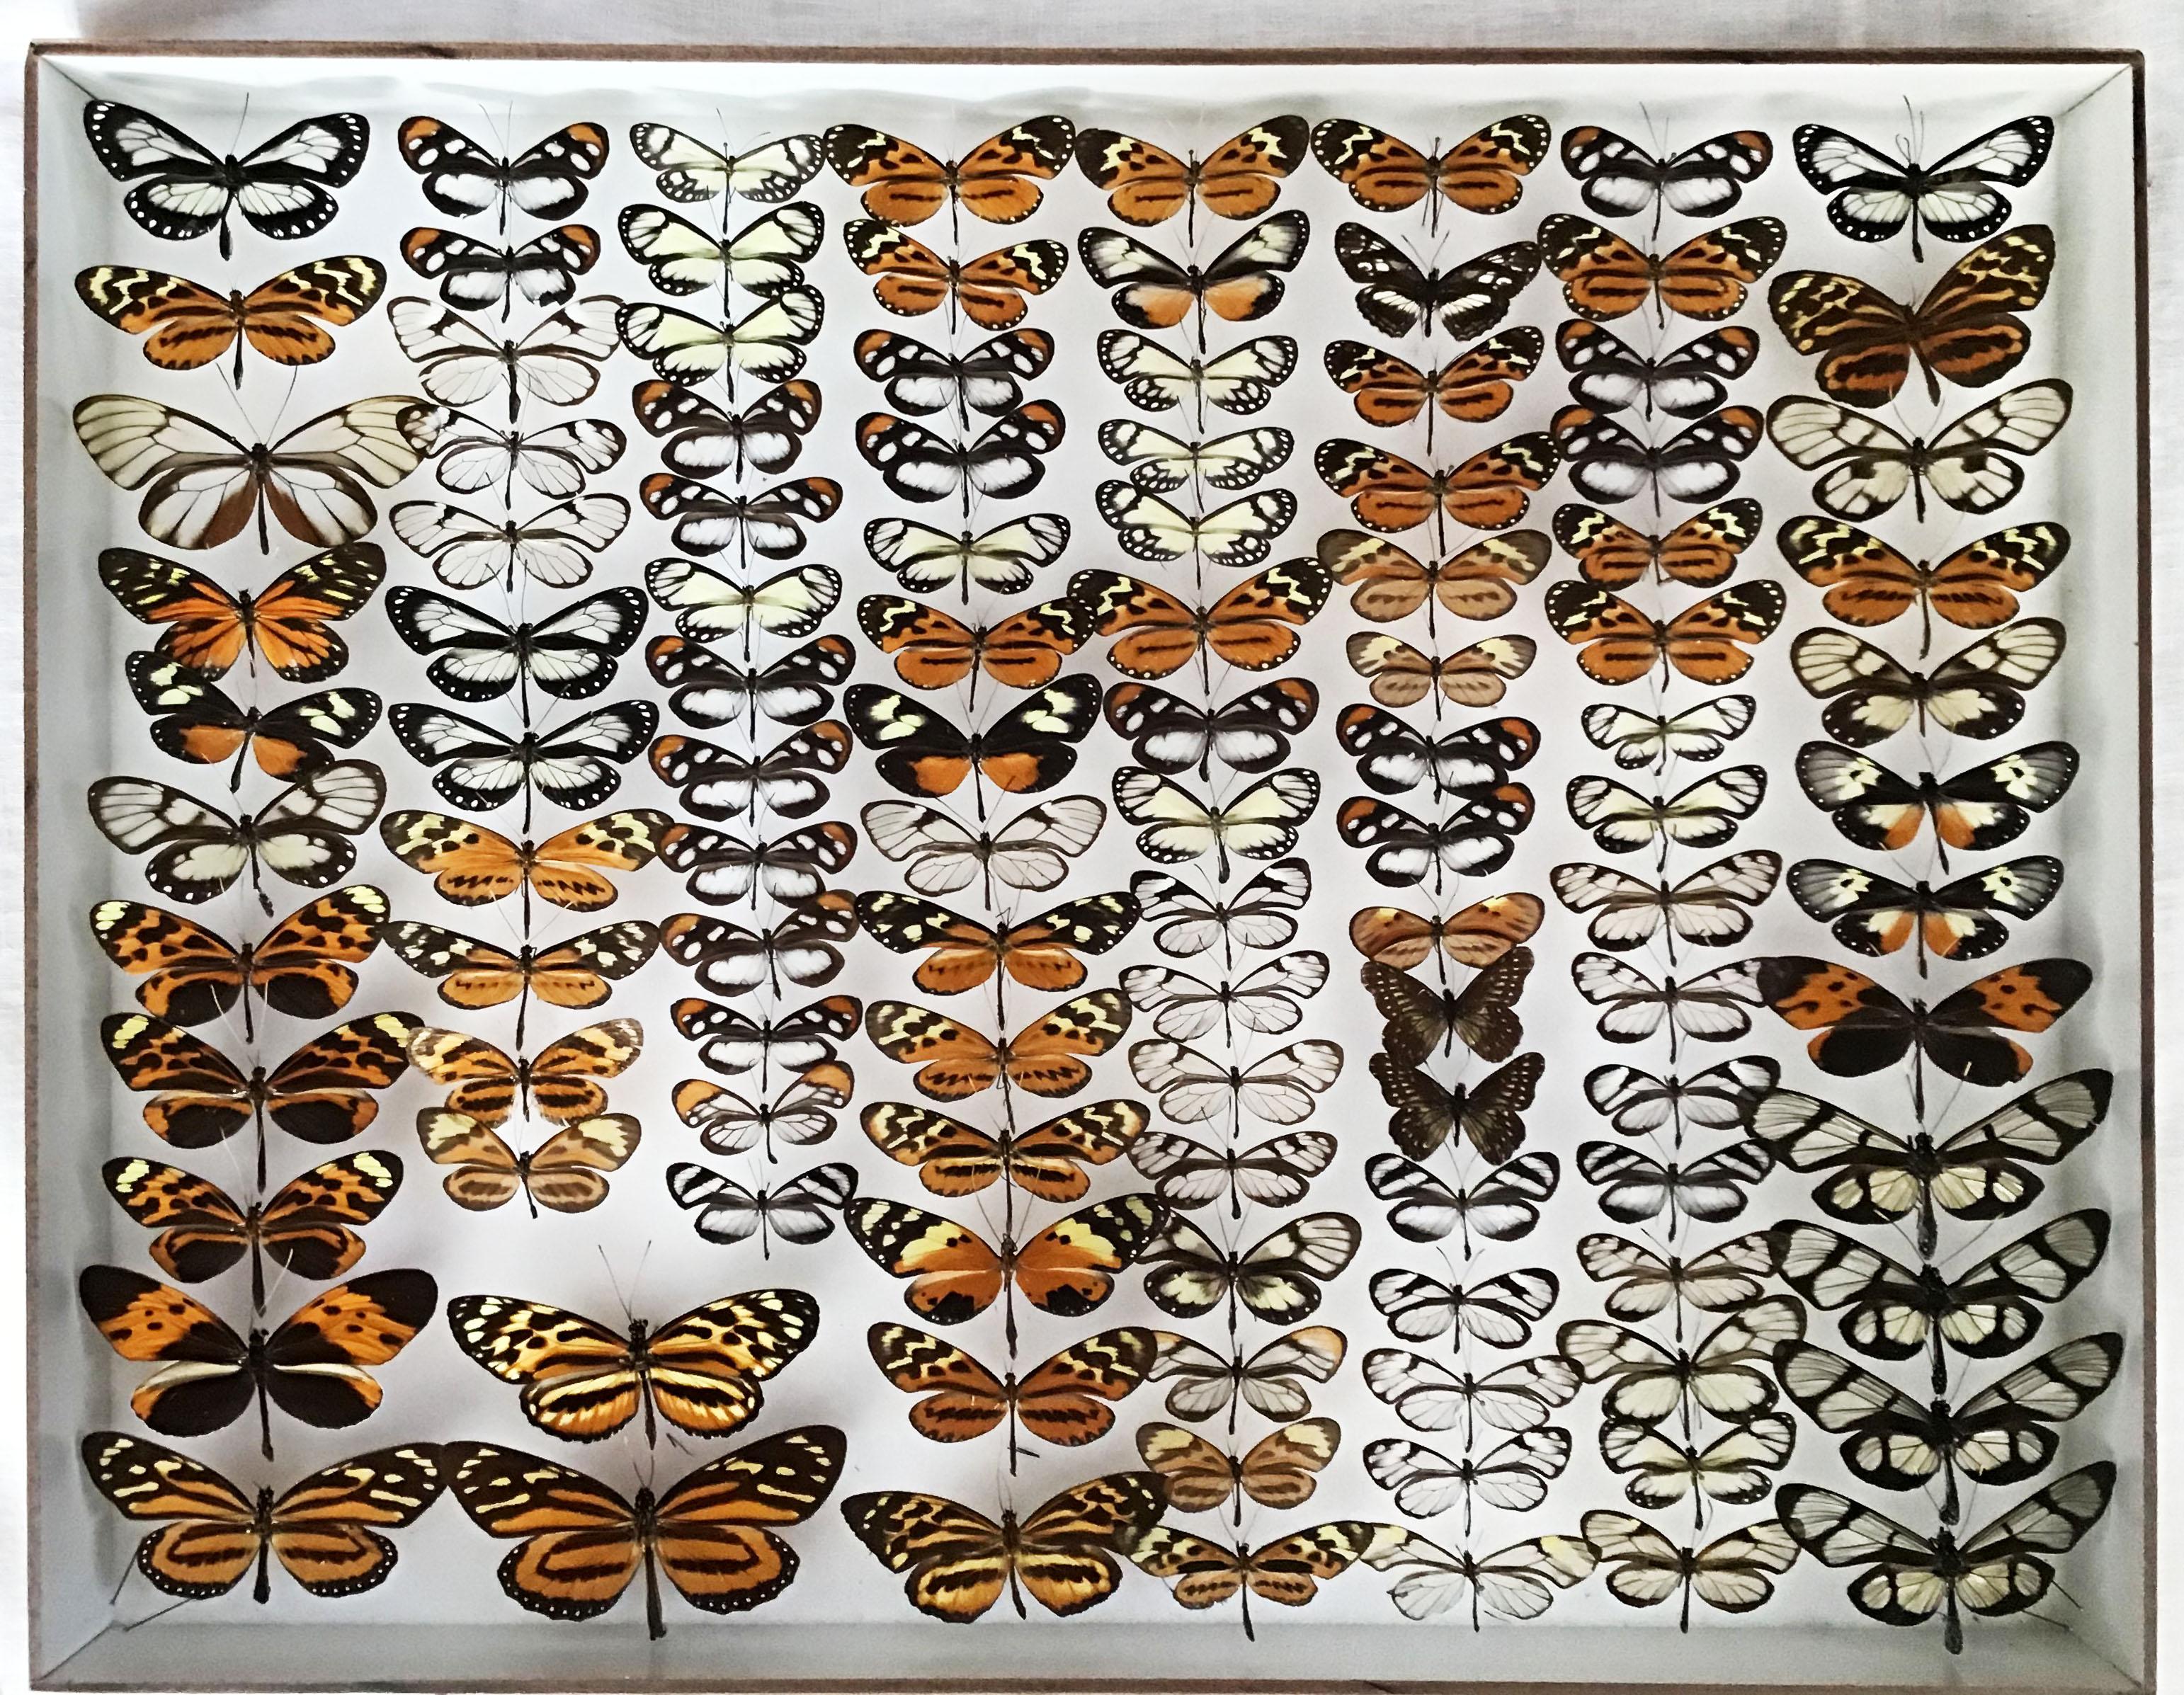 Rare collection of tropical butterfly species, including glass wing and Nymphalidae, represented mostly from South America. These stunning butterflies are set in vintage wood and glass cases. The display cases are dated to the 1960s and the